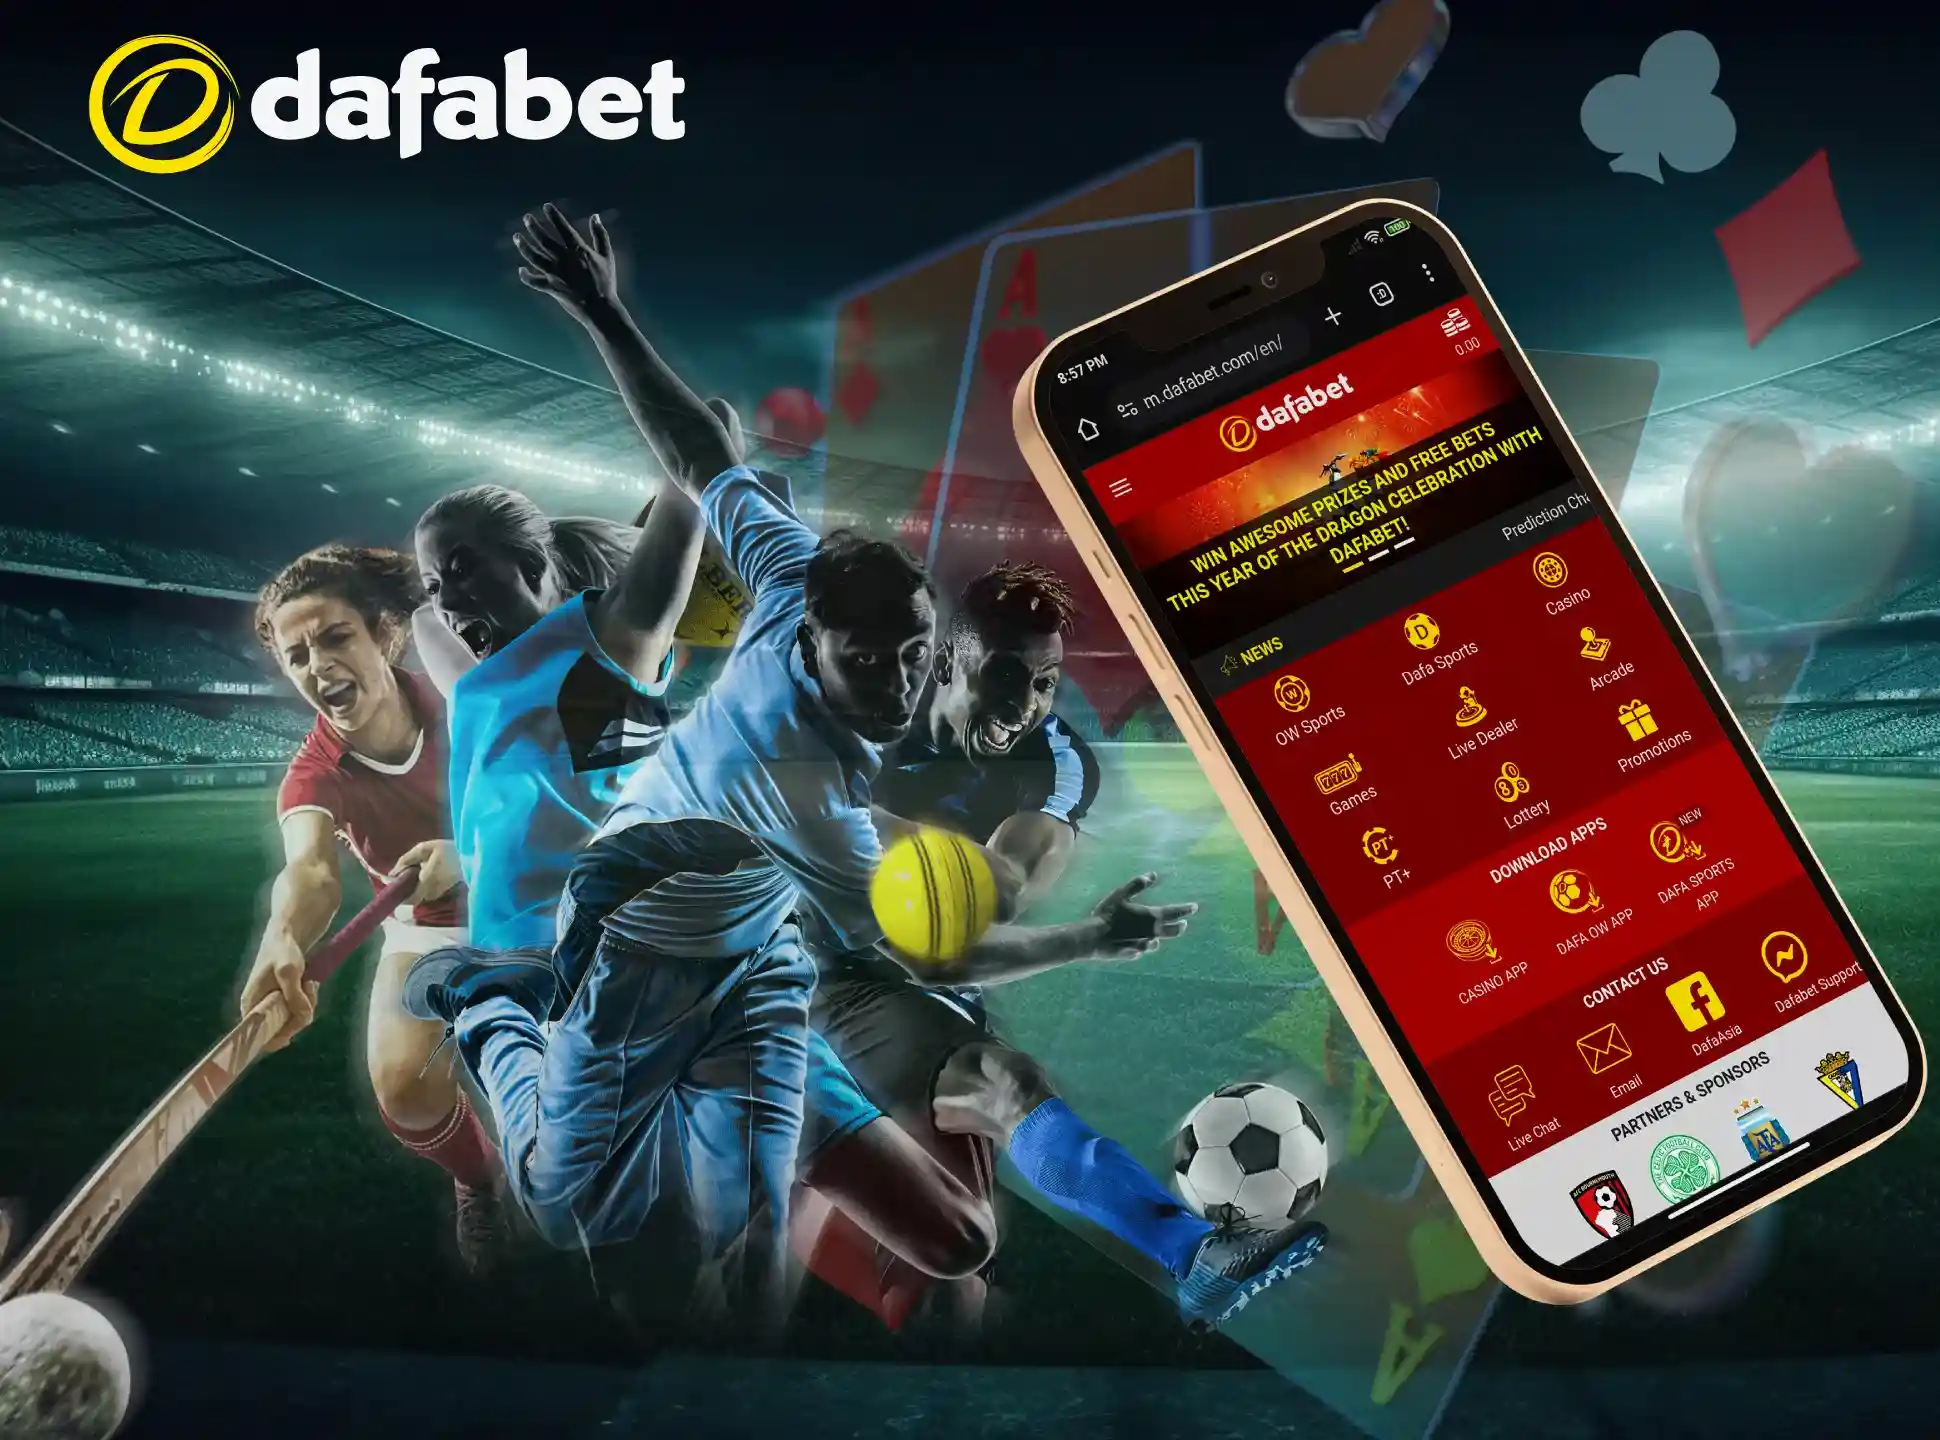 To get closer to winning take advantage of useful Dafabet tips and tricks.